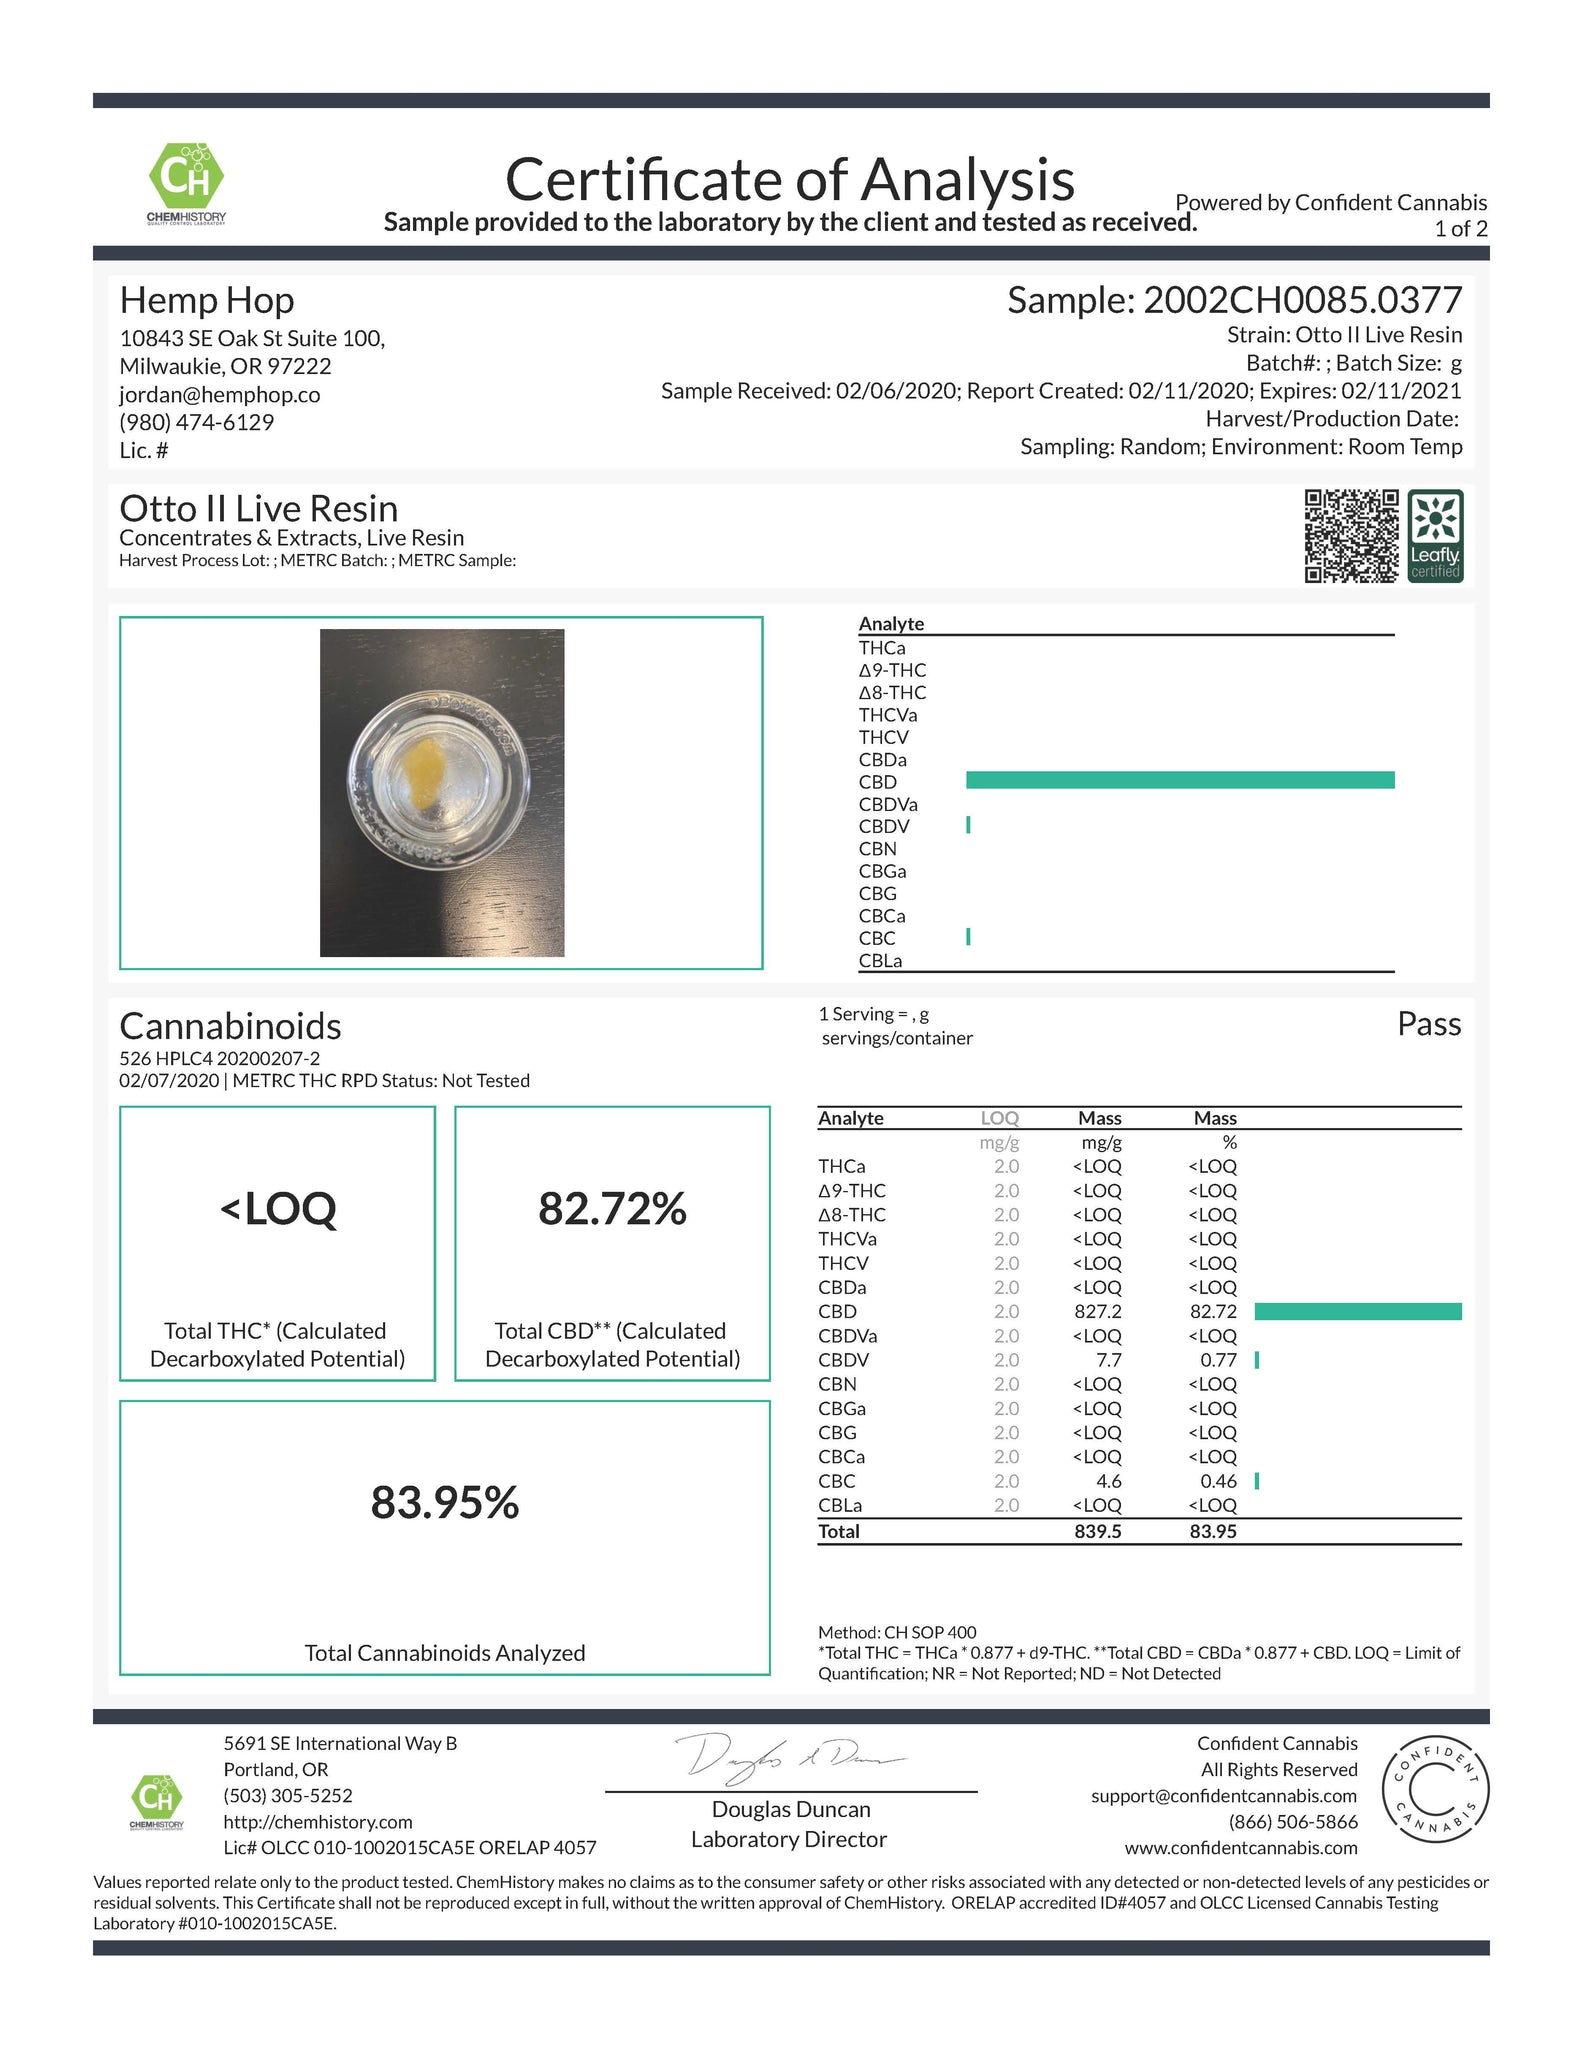 Otto ll Live Resin Cannabinoids Lab Result